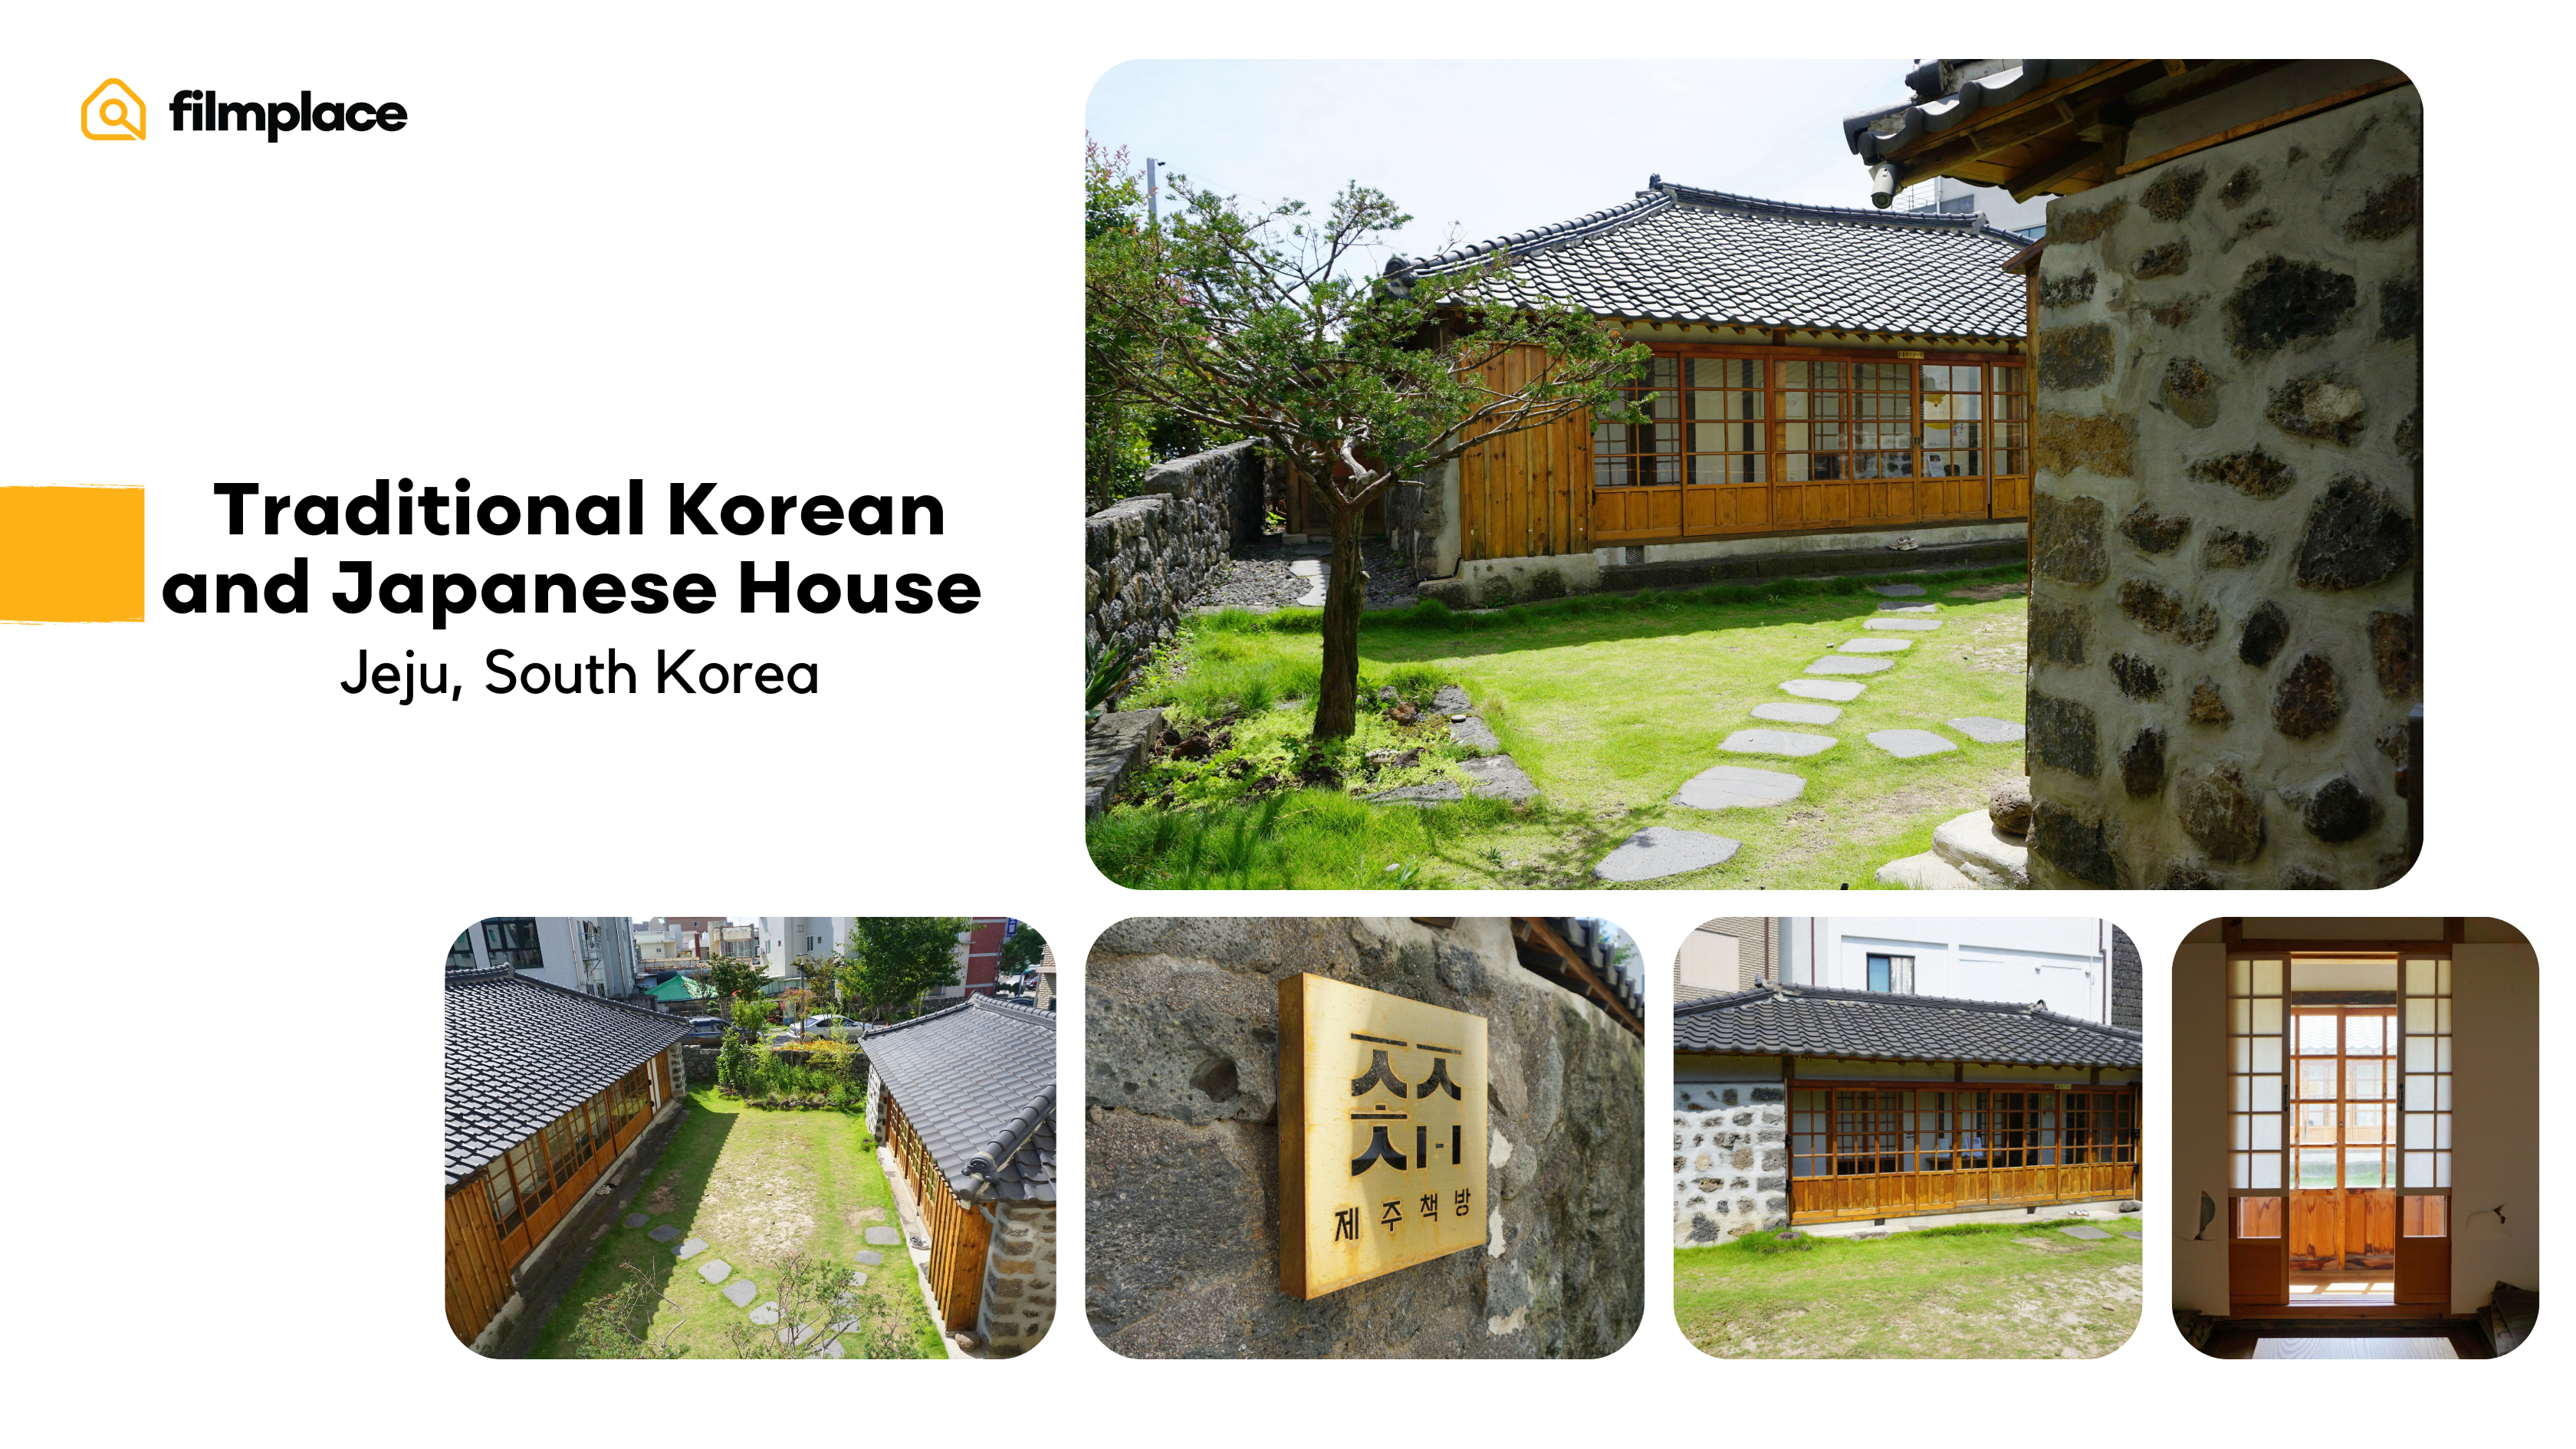 Filmplace first top film location pick April: listing 12492 traditional Korean and Japanese houses in Jeju South Korea photo collage